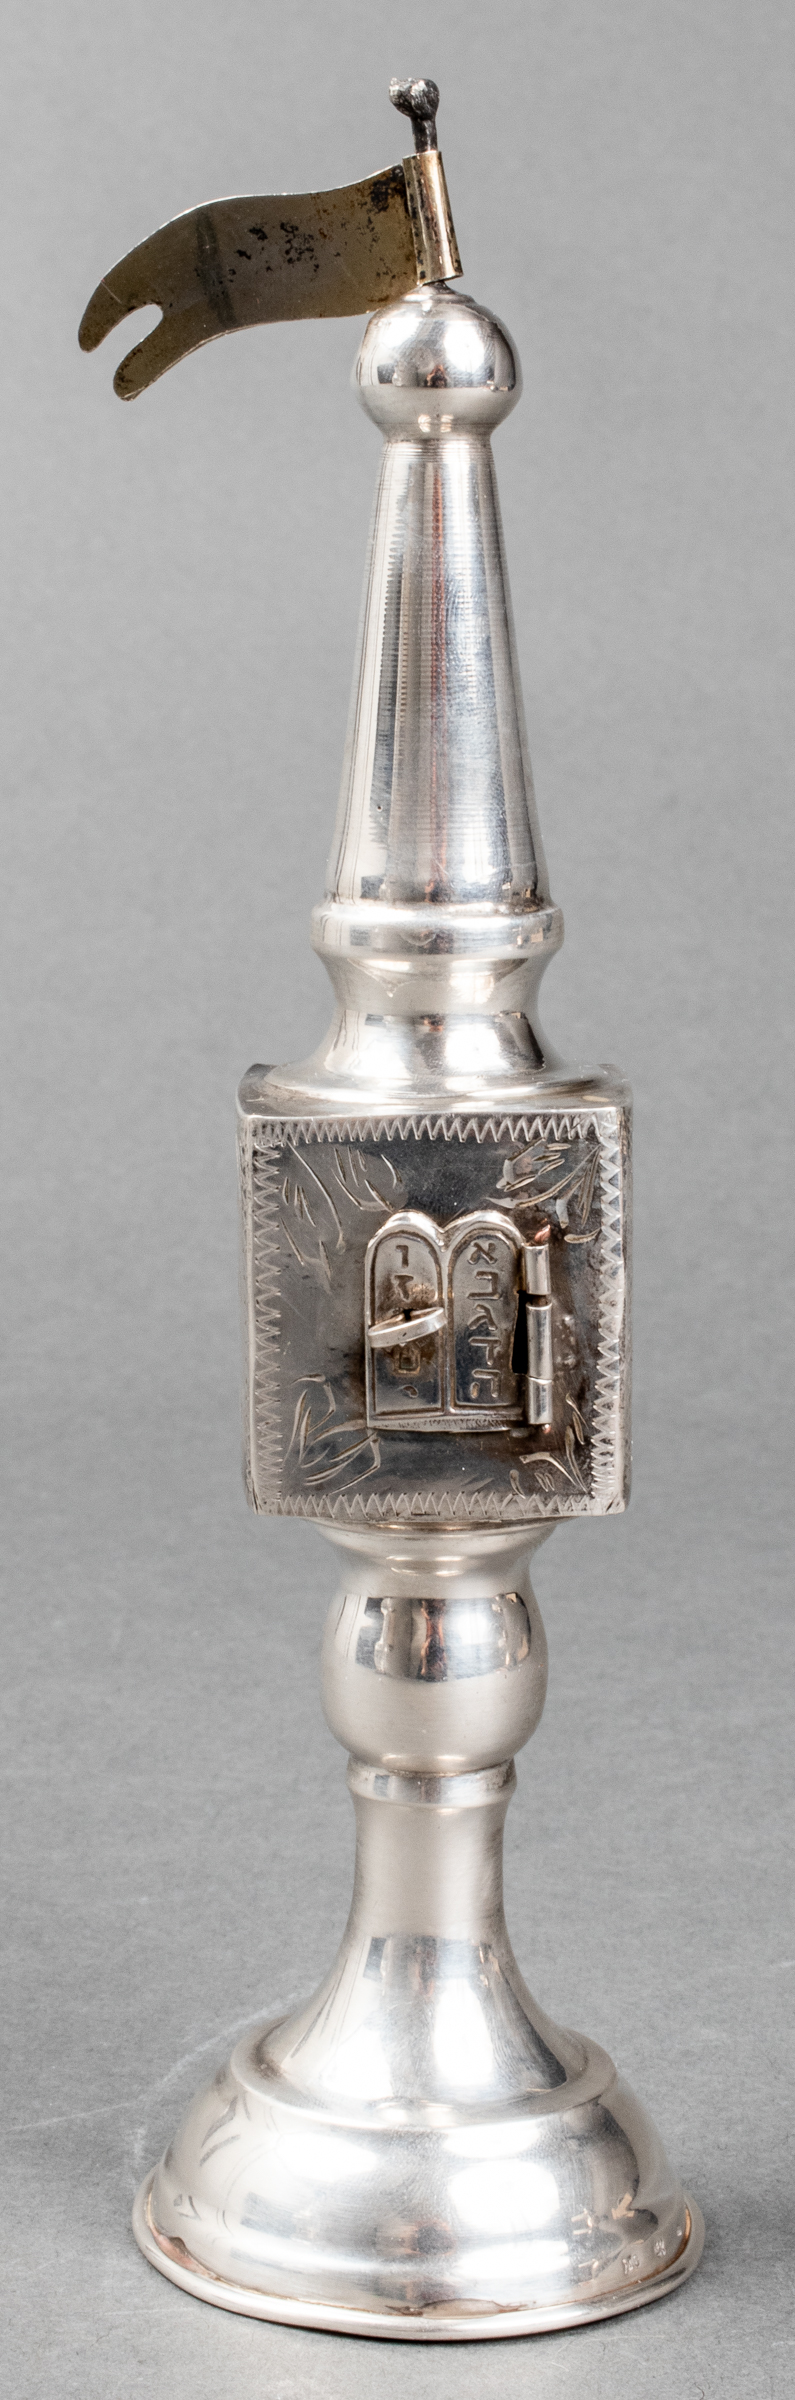 JUDAICA RUSSIAN SILVER SPICE TOWER